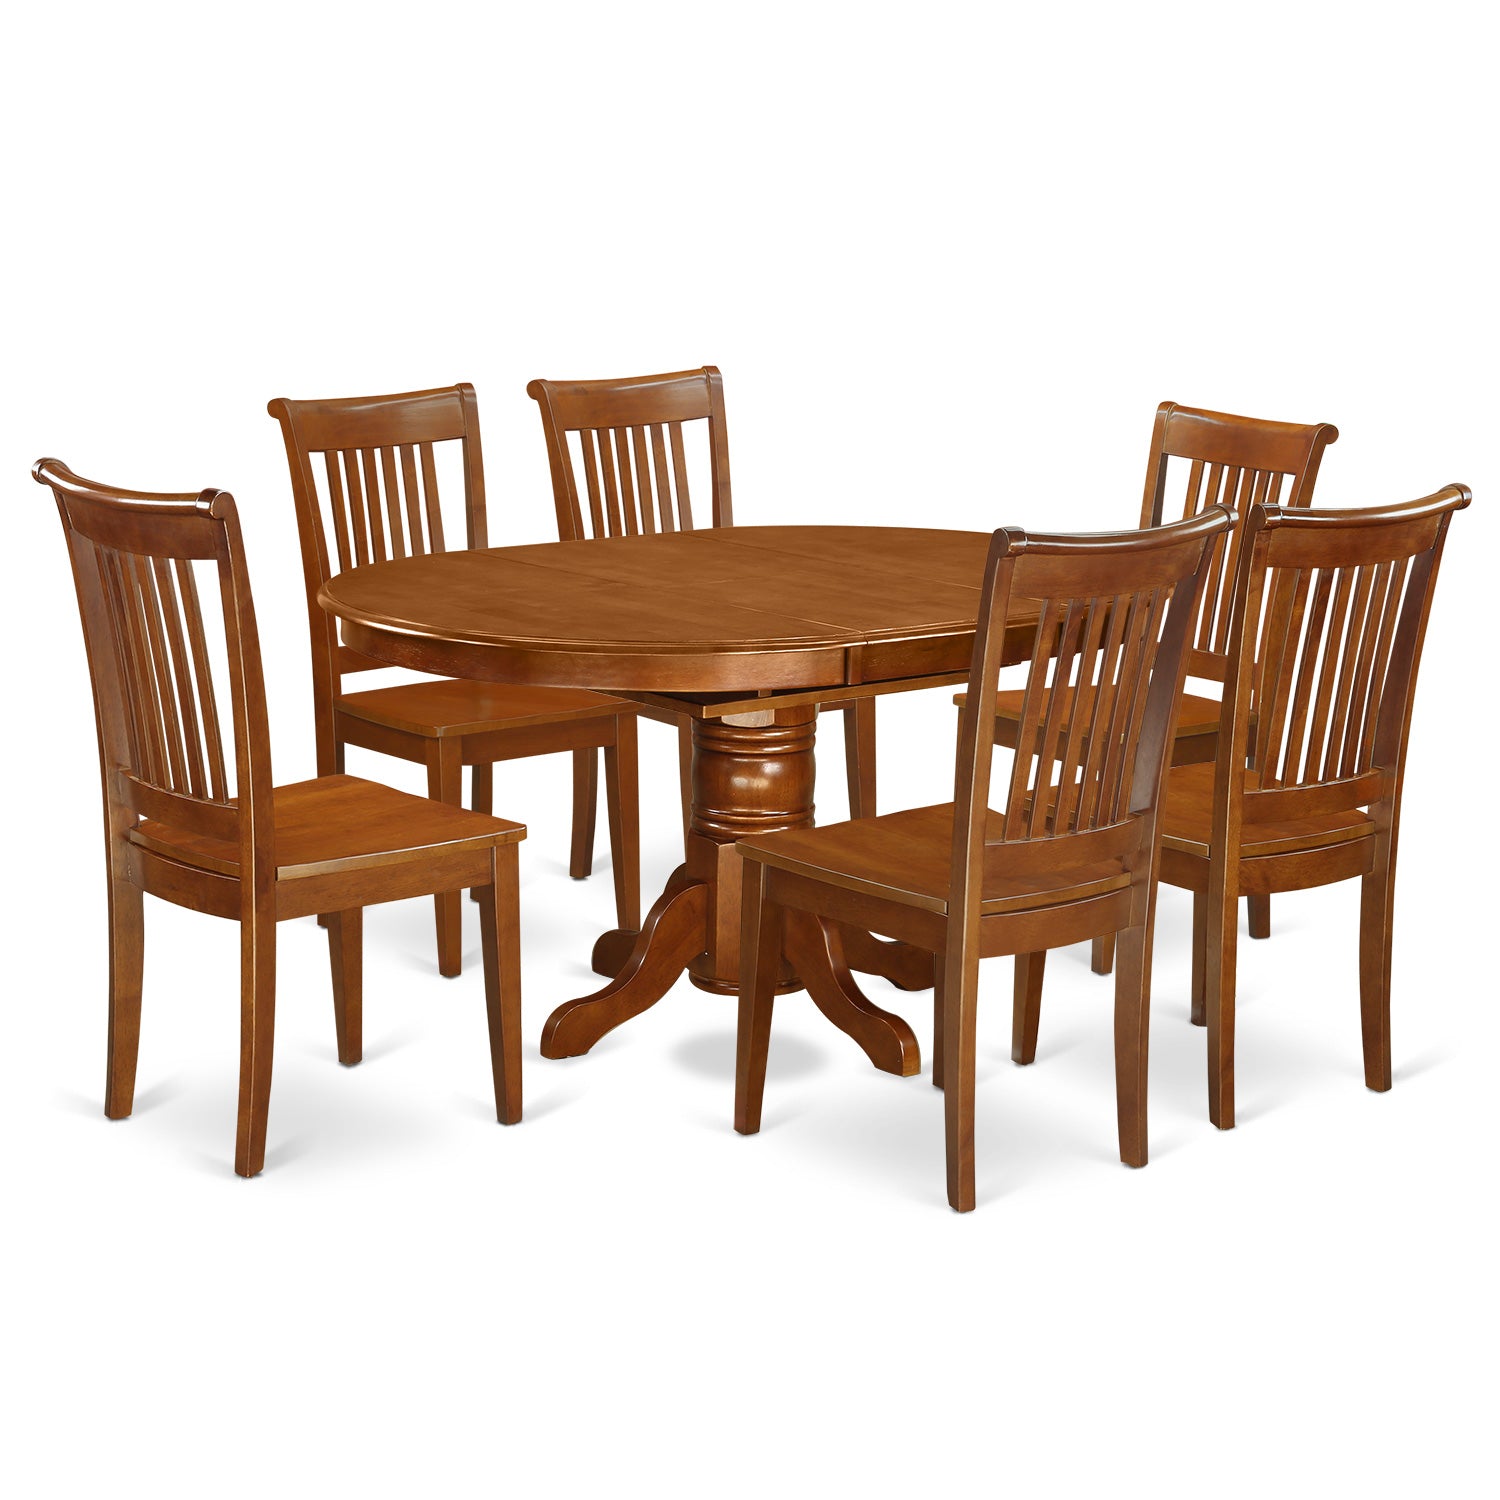 AVPO7-SBR-W 7 Pc set Avon Dinette Table with Leaf and 6 Wood Kitchen Chairs in Saddle Brown